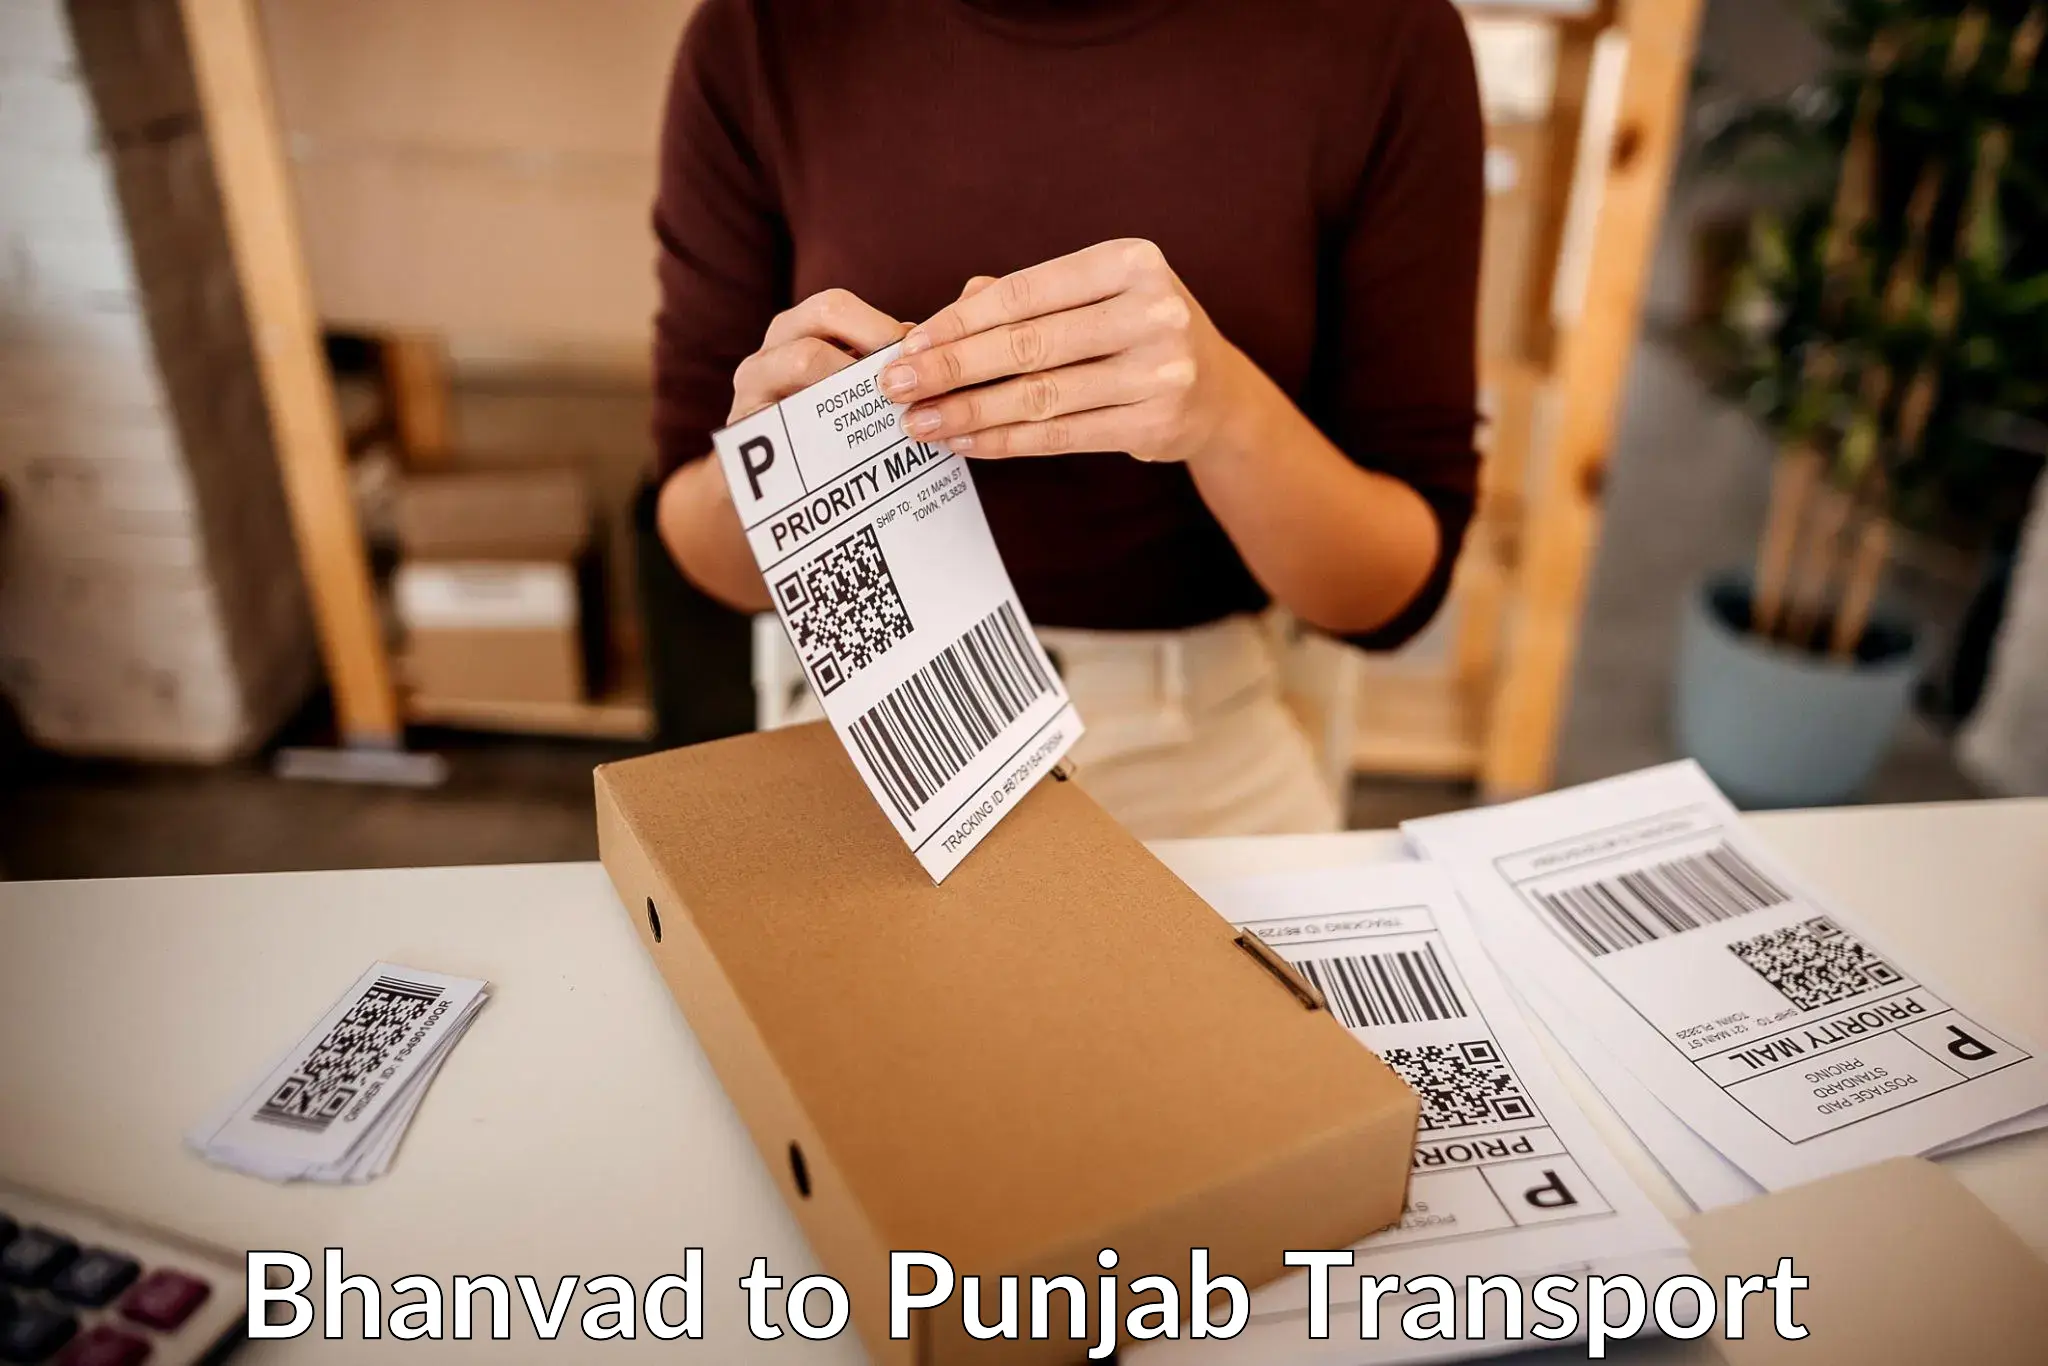 Nationwide transport services Bhanvad to Khanna